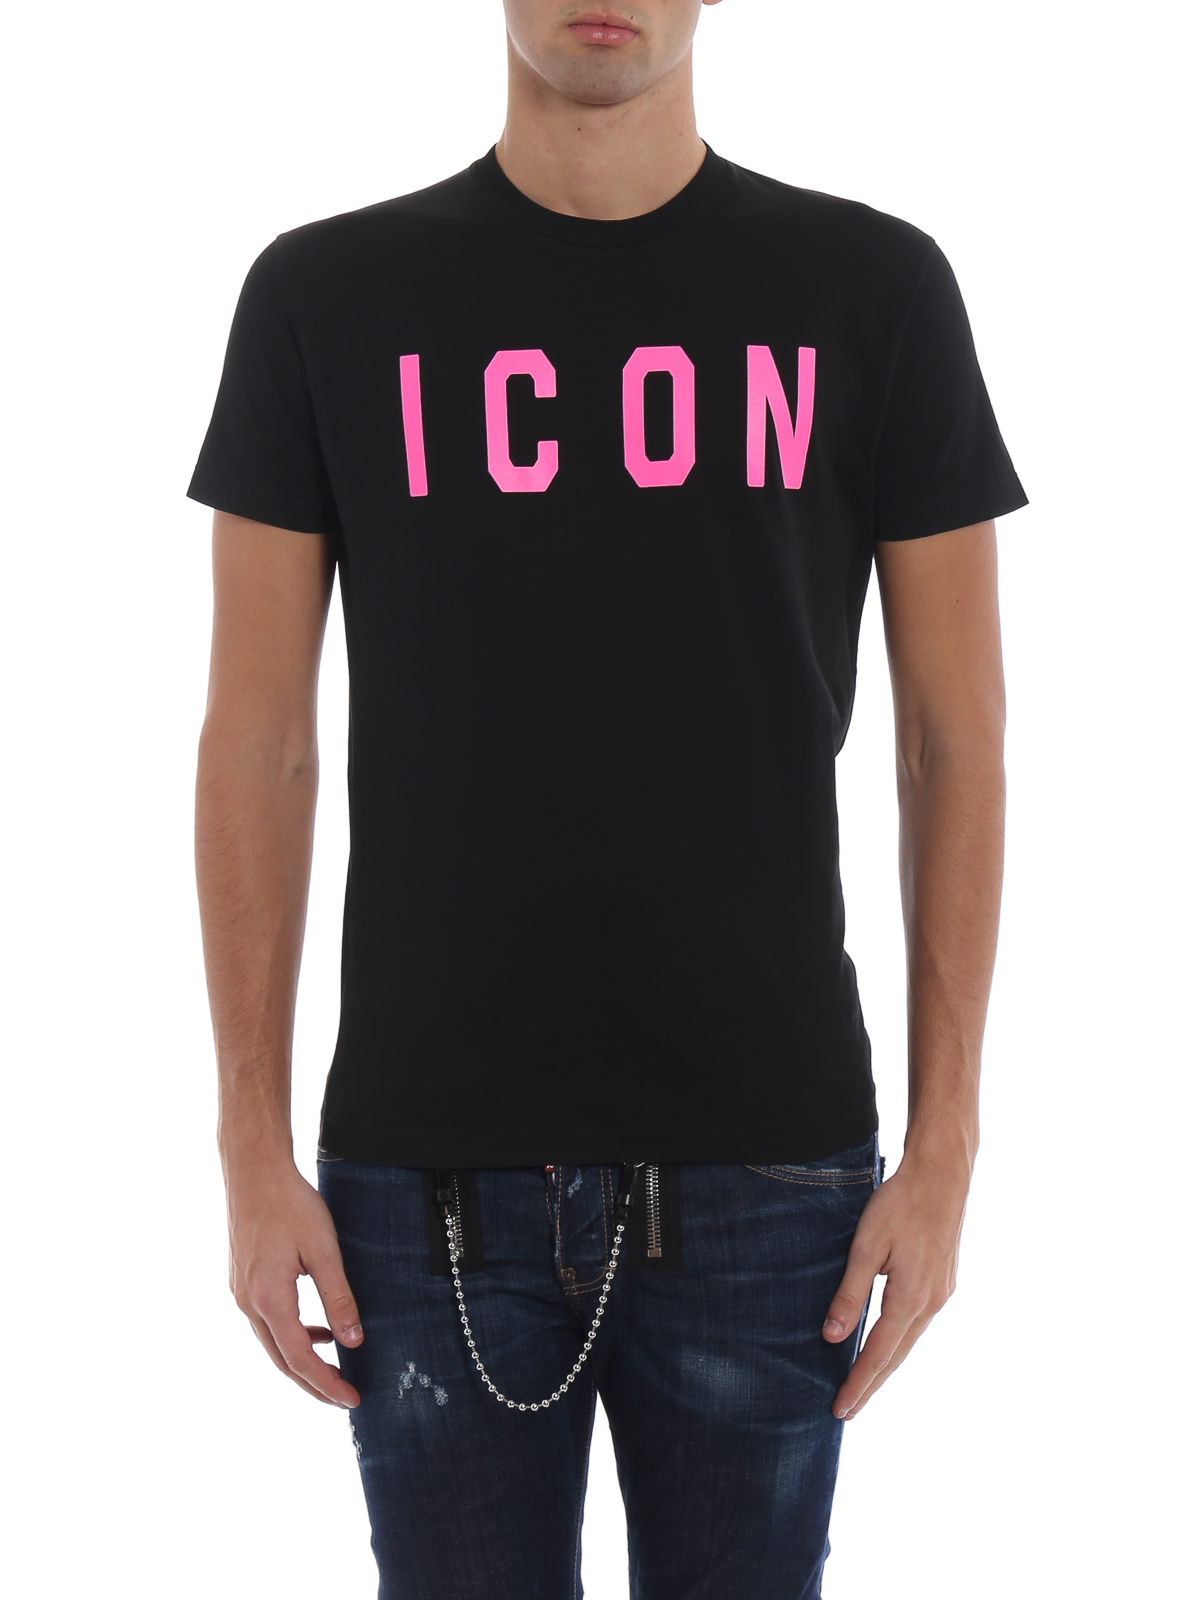 dsquared2 icon t shirt womens